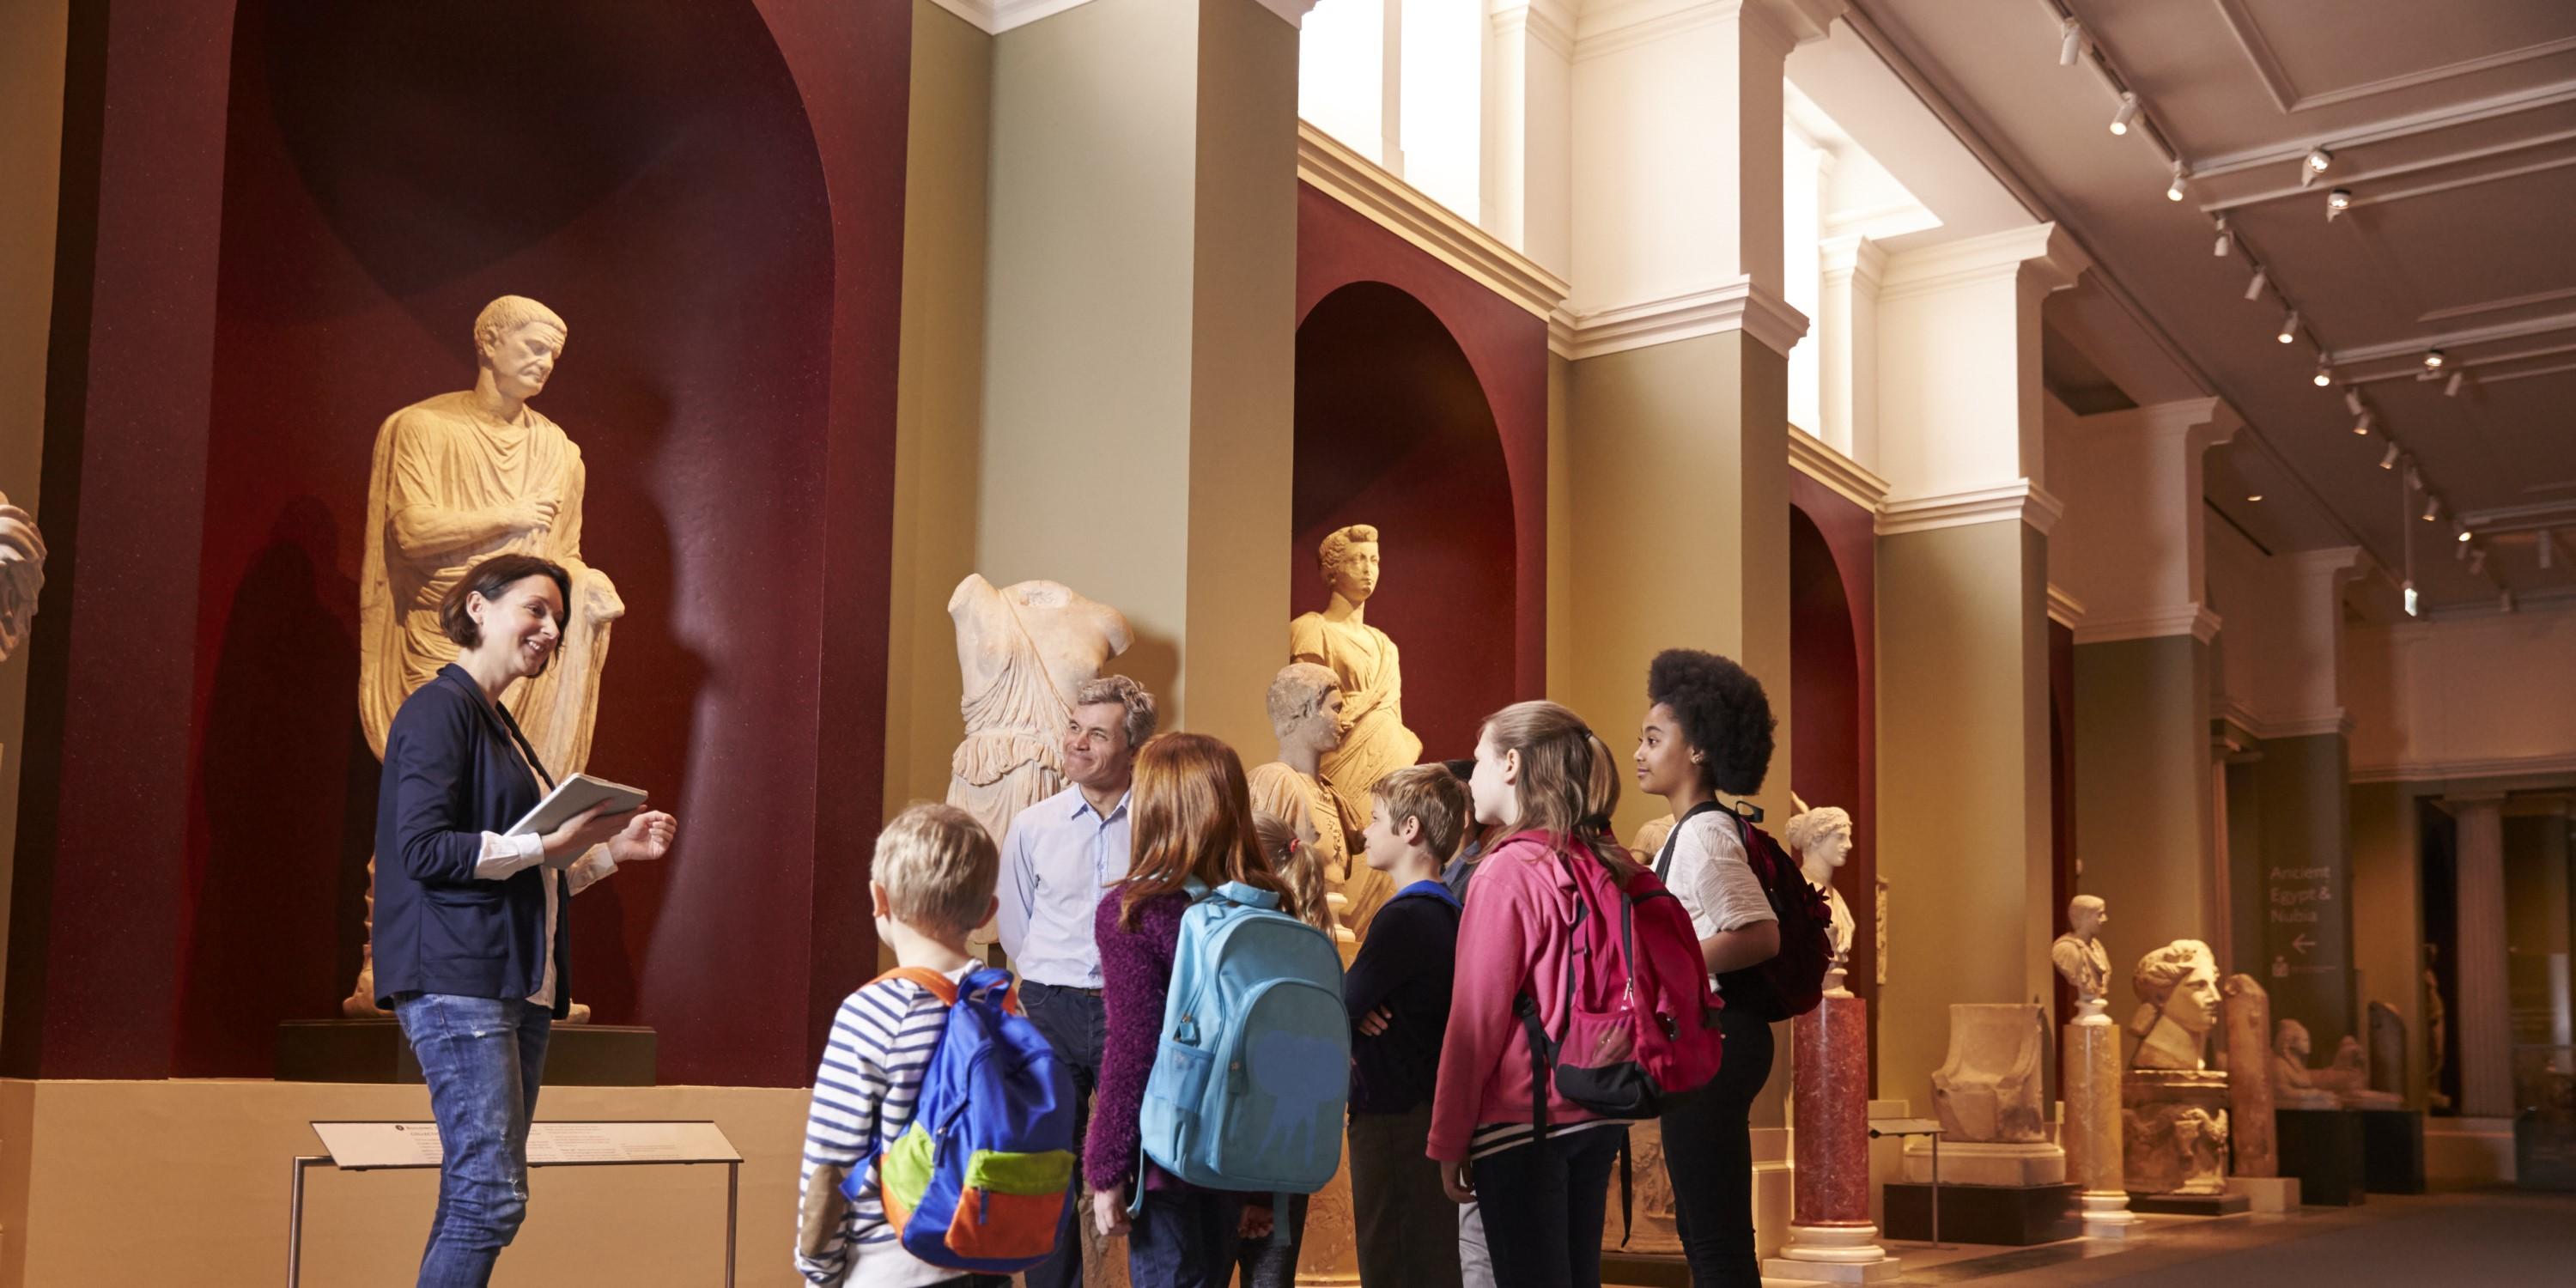 A guide or teacher showing a group of attentive children around a museum.